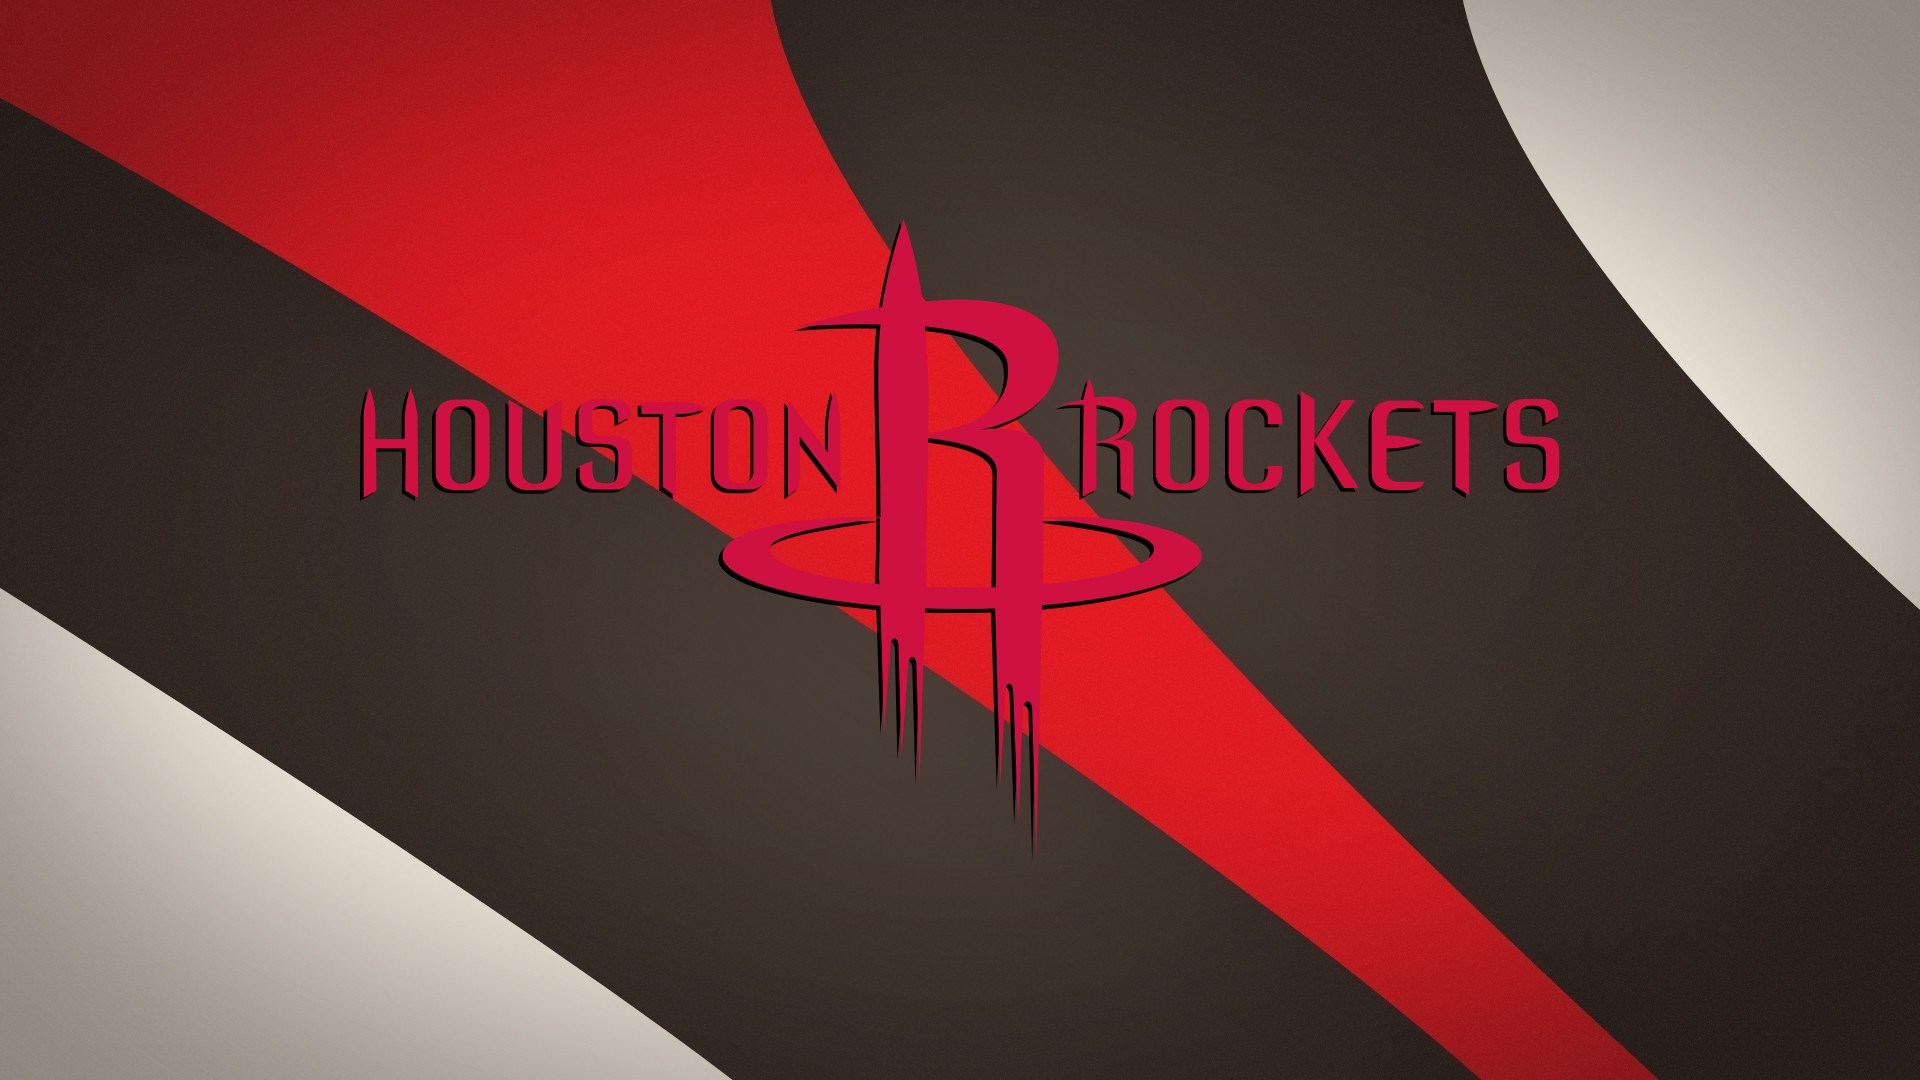 Rockets Wallpaper HD with image dimensions 1920x1080 pixel. You can make this wallpaper for your Desktop Computer Backgrounds, Windows or Mac Screensavers, iPhone Lock screen, Tablet or Android and another Mobile Phone device